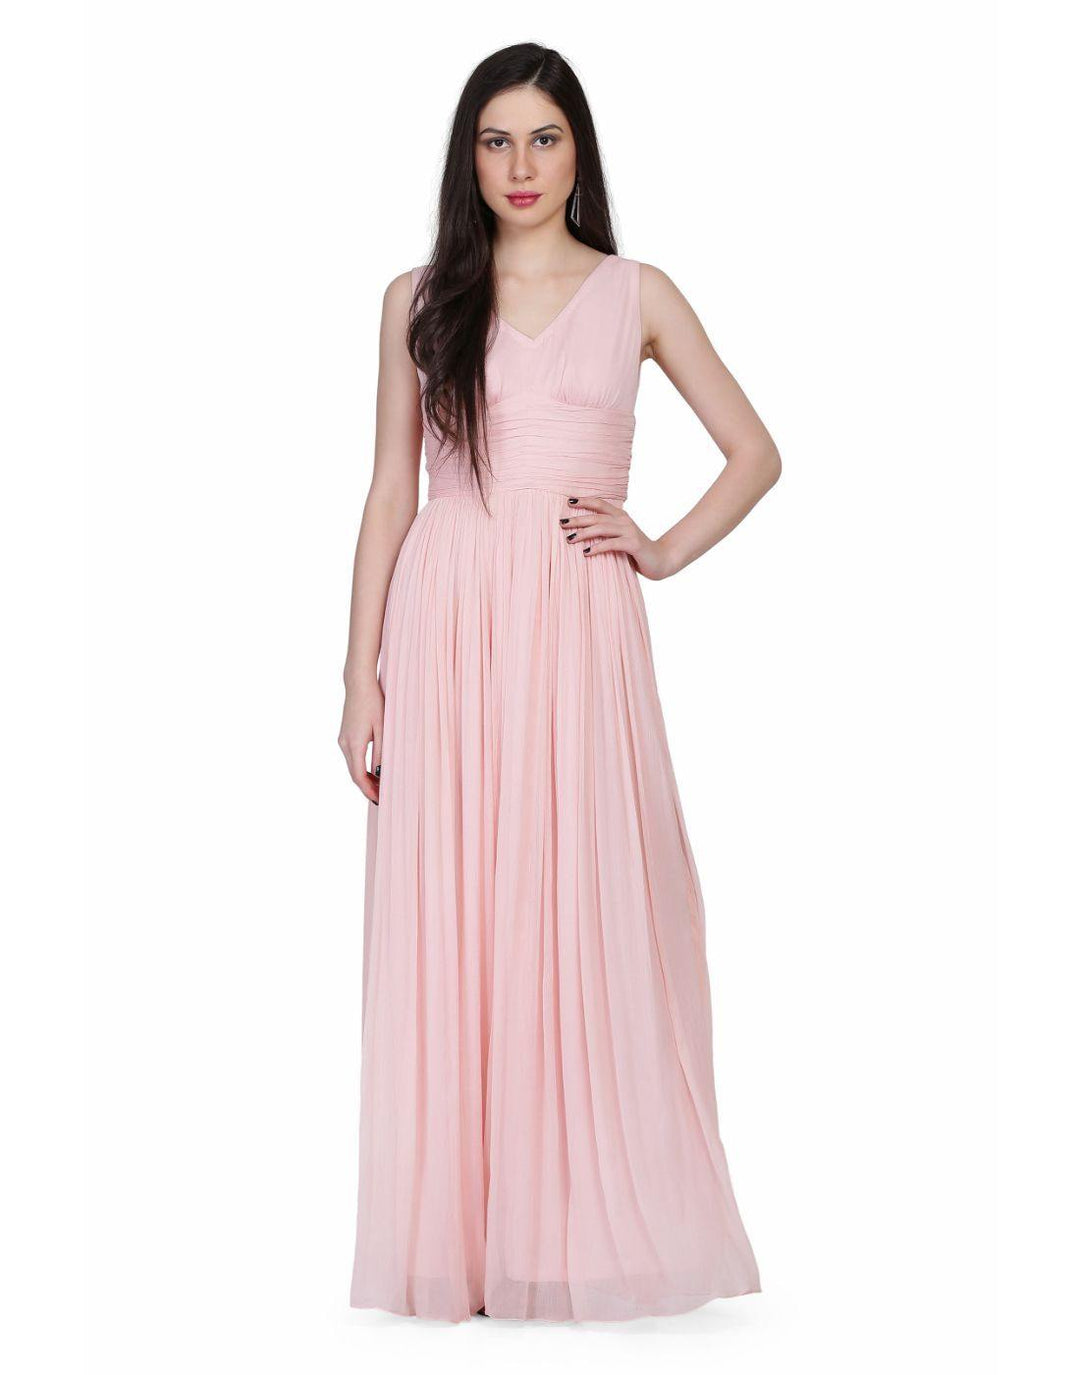 Rent Miracolos by Ruchi Women's Chiffon Party Evening Gown Light Pink-Women-Glamourental